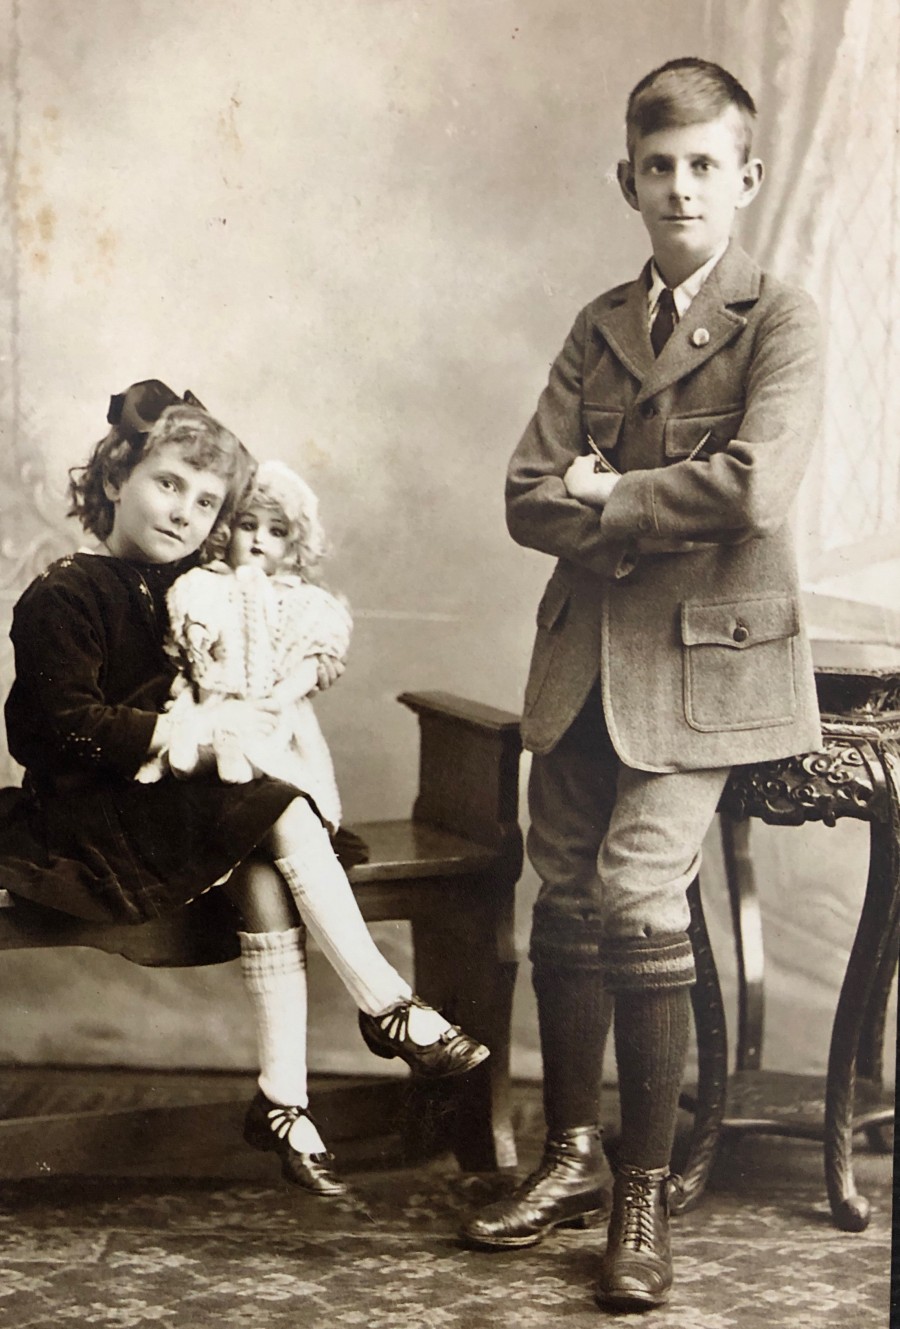 Aunty Daisy and Willy (Dad) About 1915